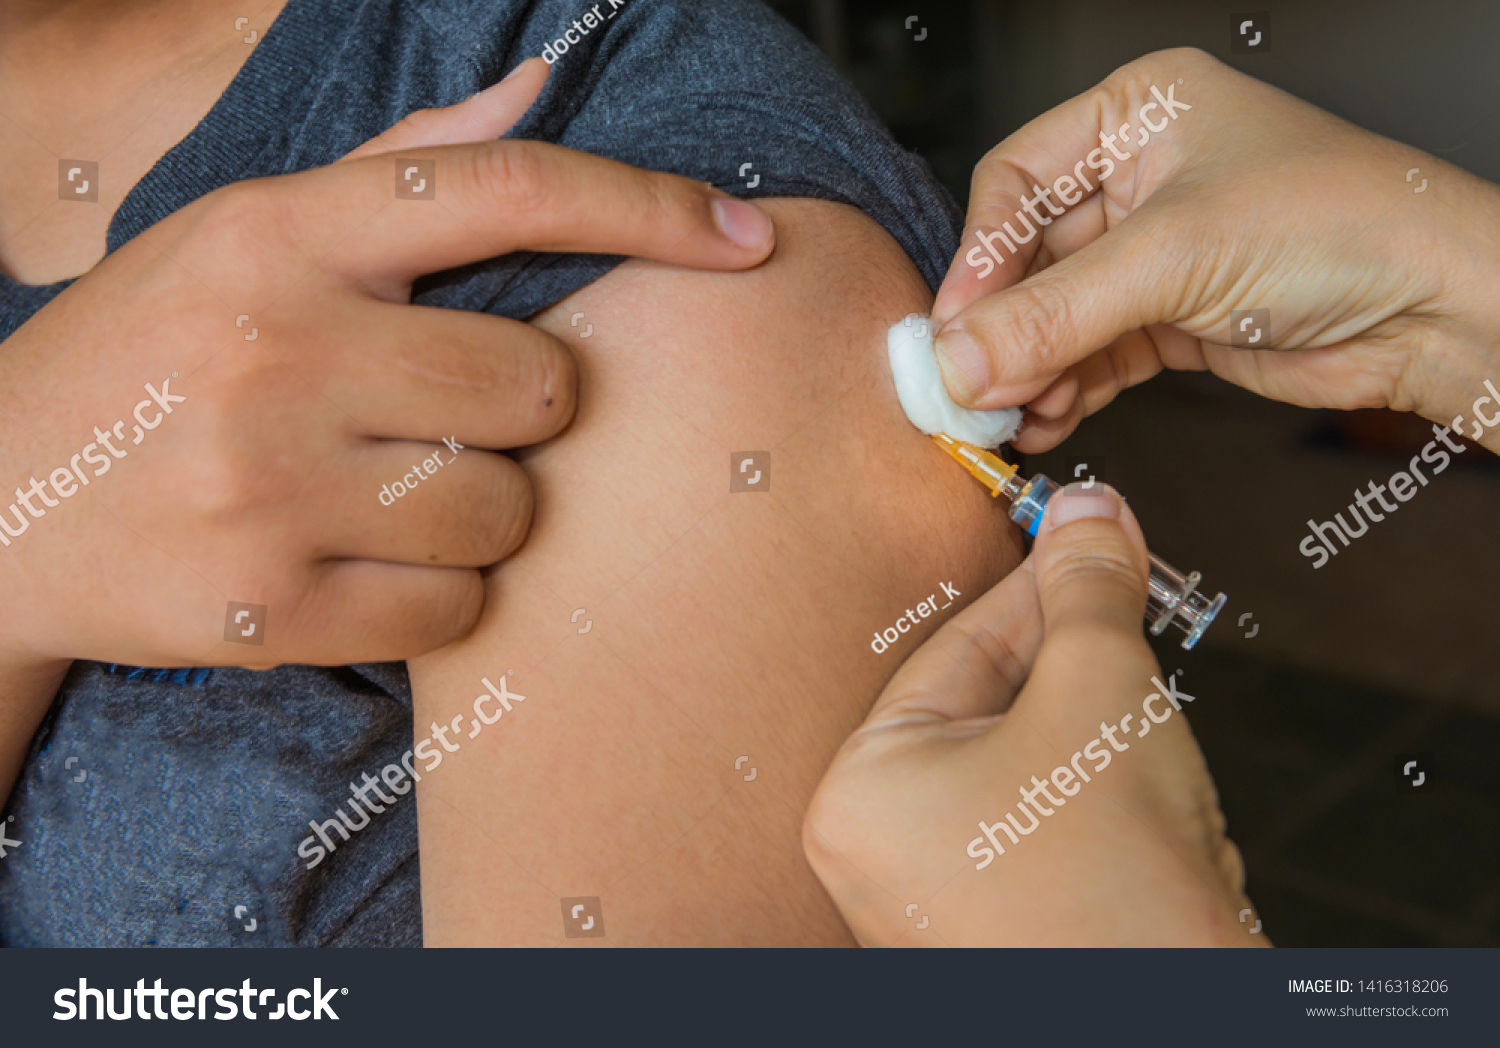 Nurse are vaccinations to patients using the syringe.Doctor vaccinating women in hospital.Are treated by the use of sterile injectable upper arm.injection,antibody,influenza vaccine image. #1416318206